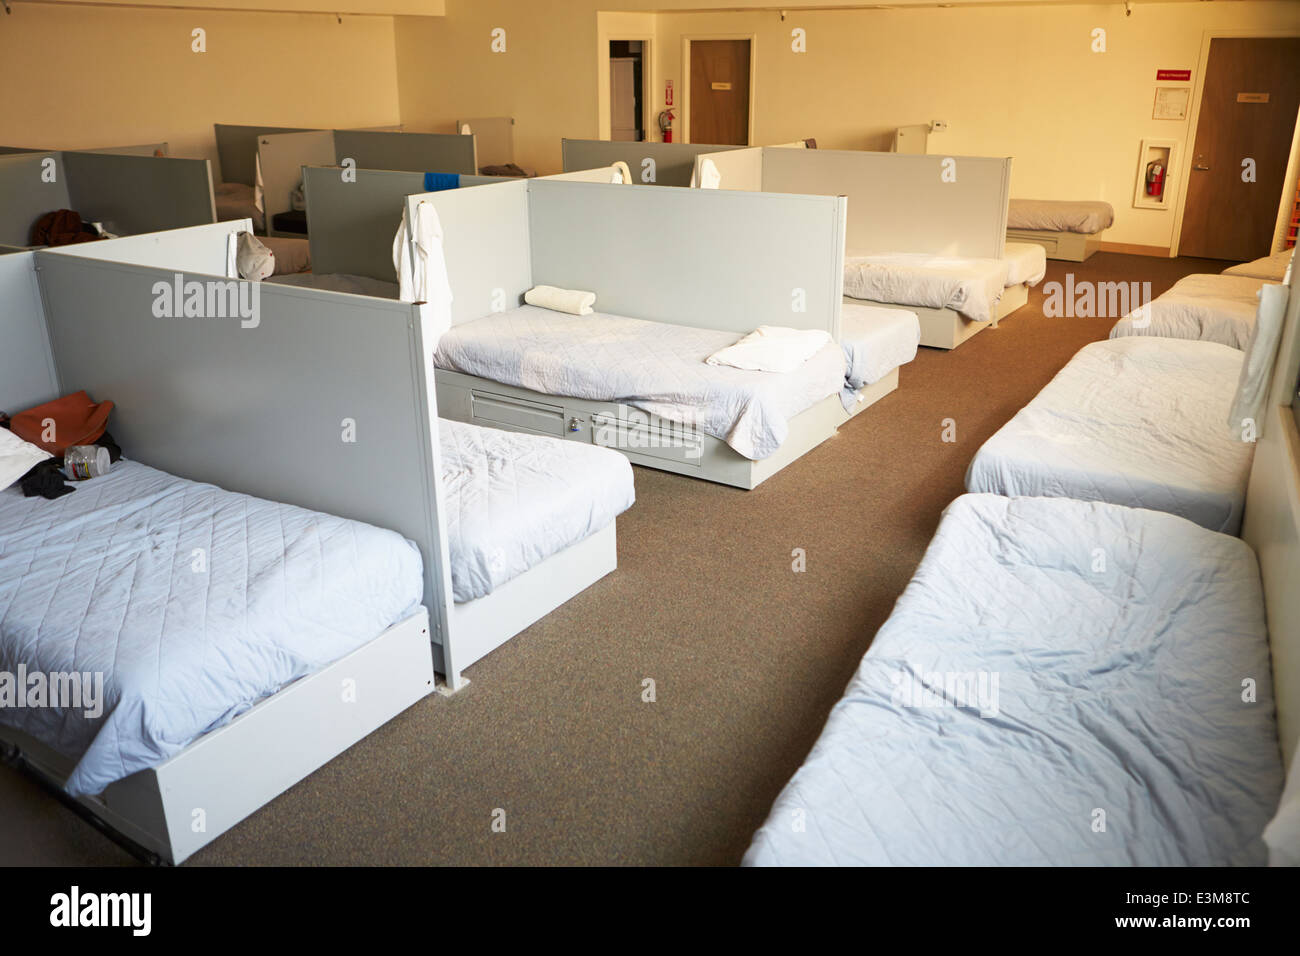 Empty Beds In Homeless Shelter Stock Photo